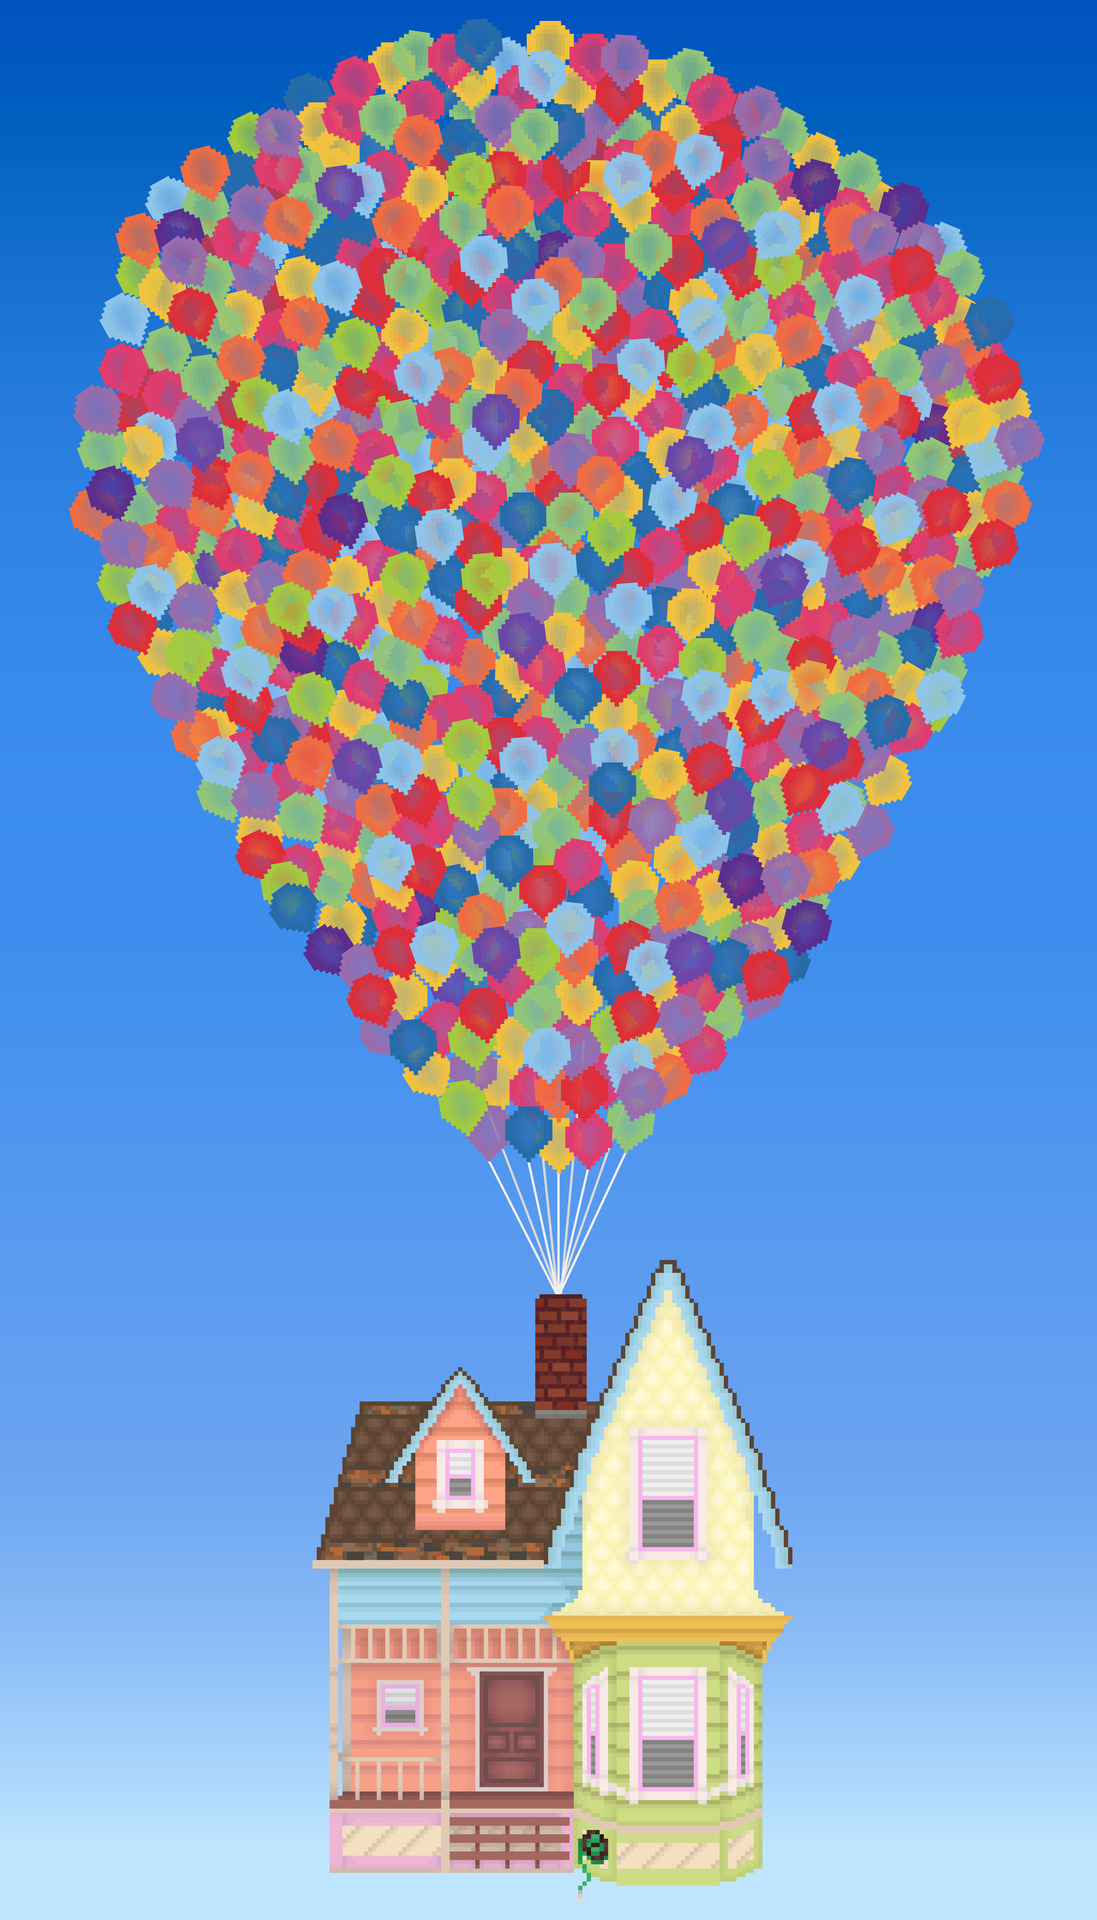 Download up house pixar clipart 20 free Cliparts | Download images ...